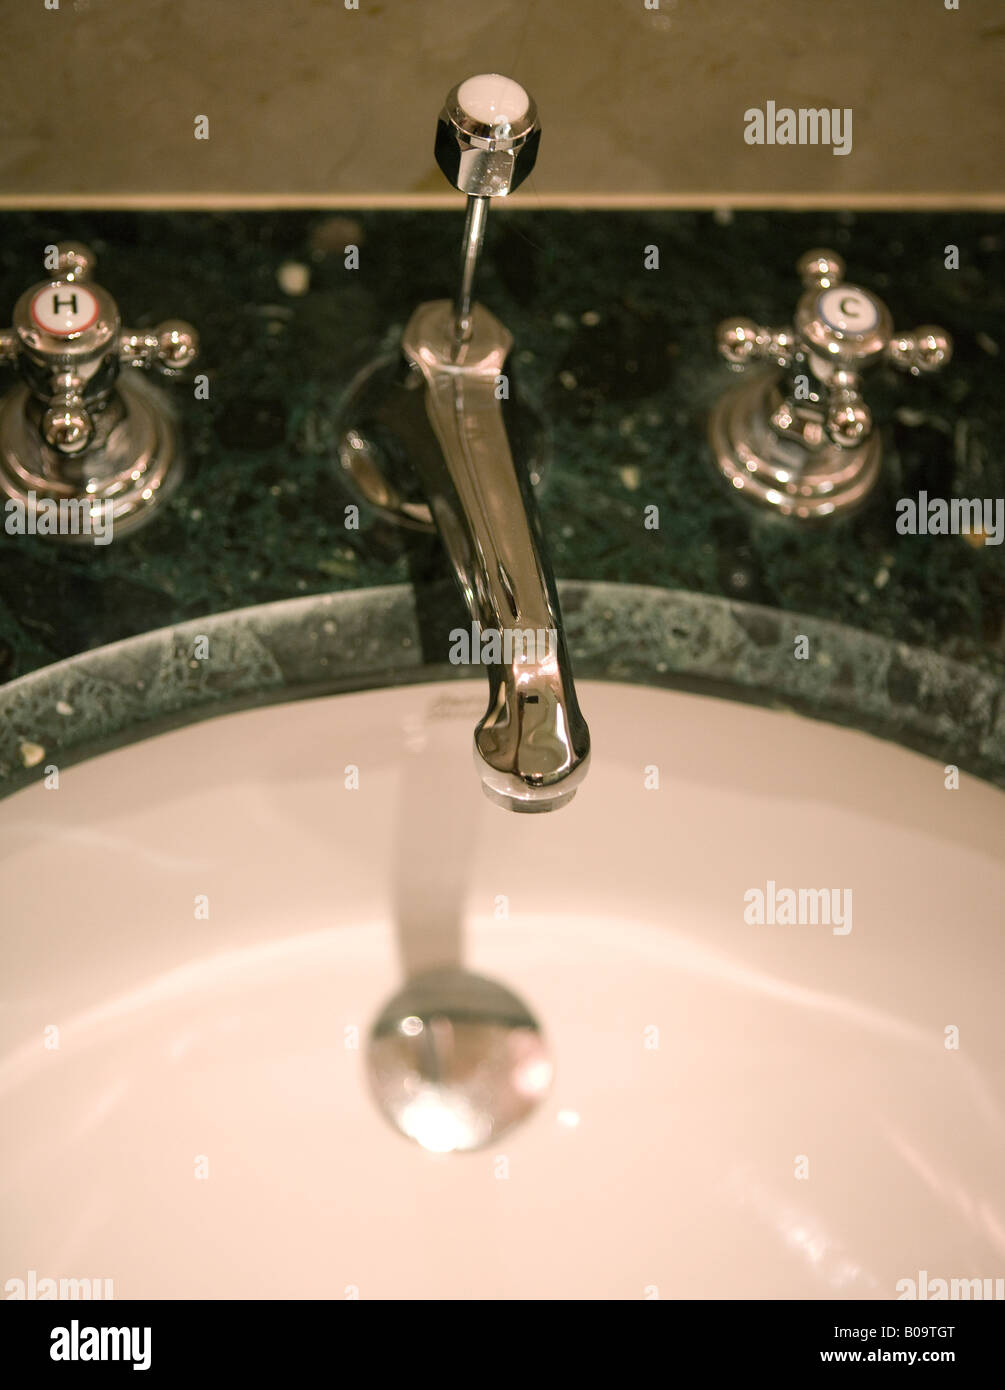 Silver, old-fashioned watertap with separate hot and cold taps, green marble and white sink Stock Photo